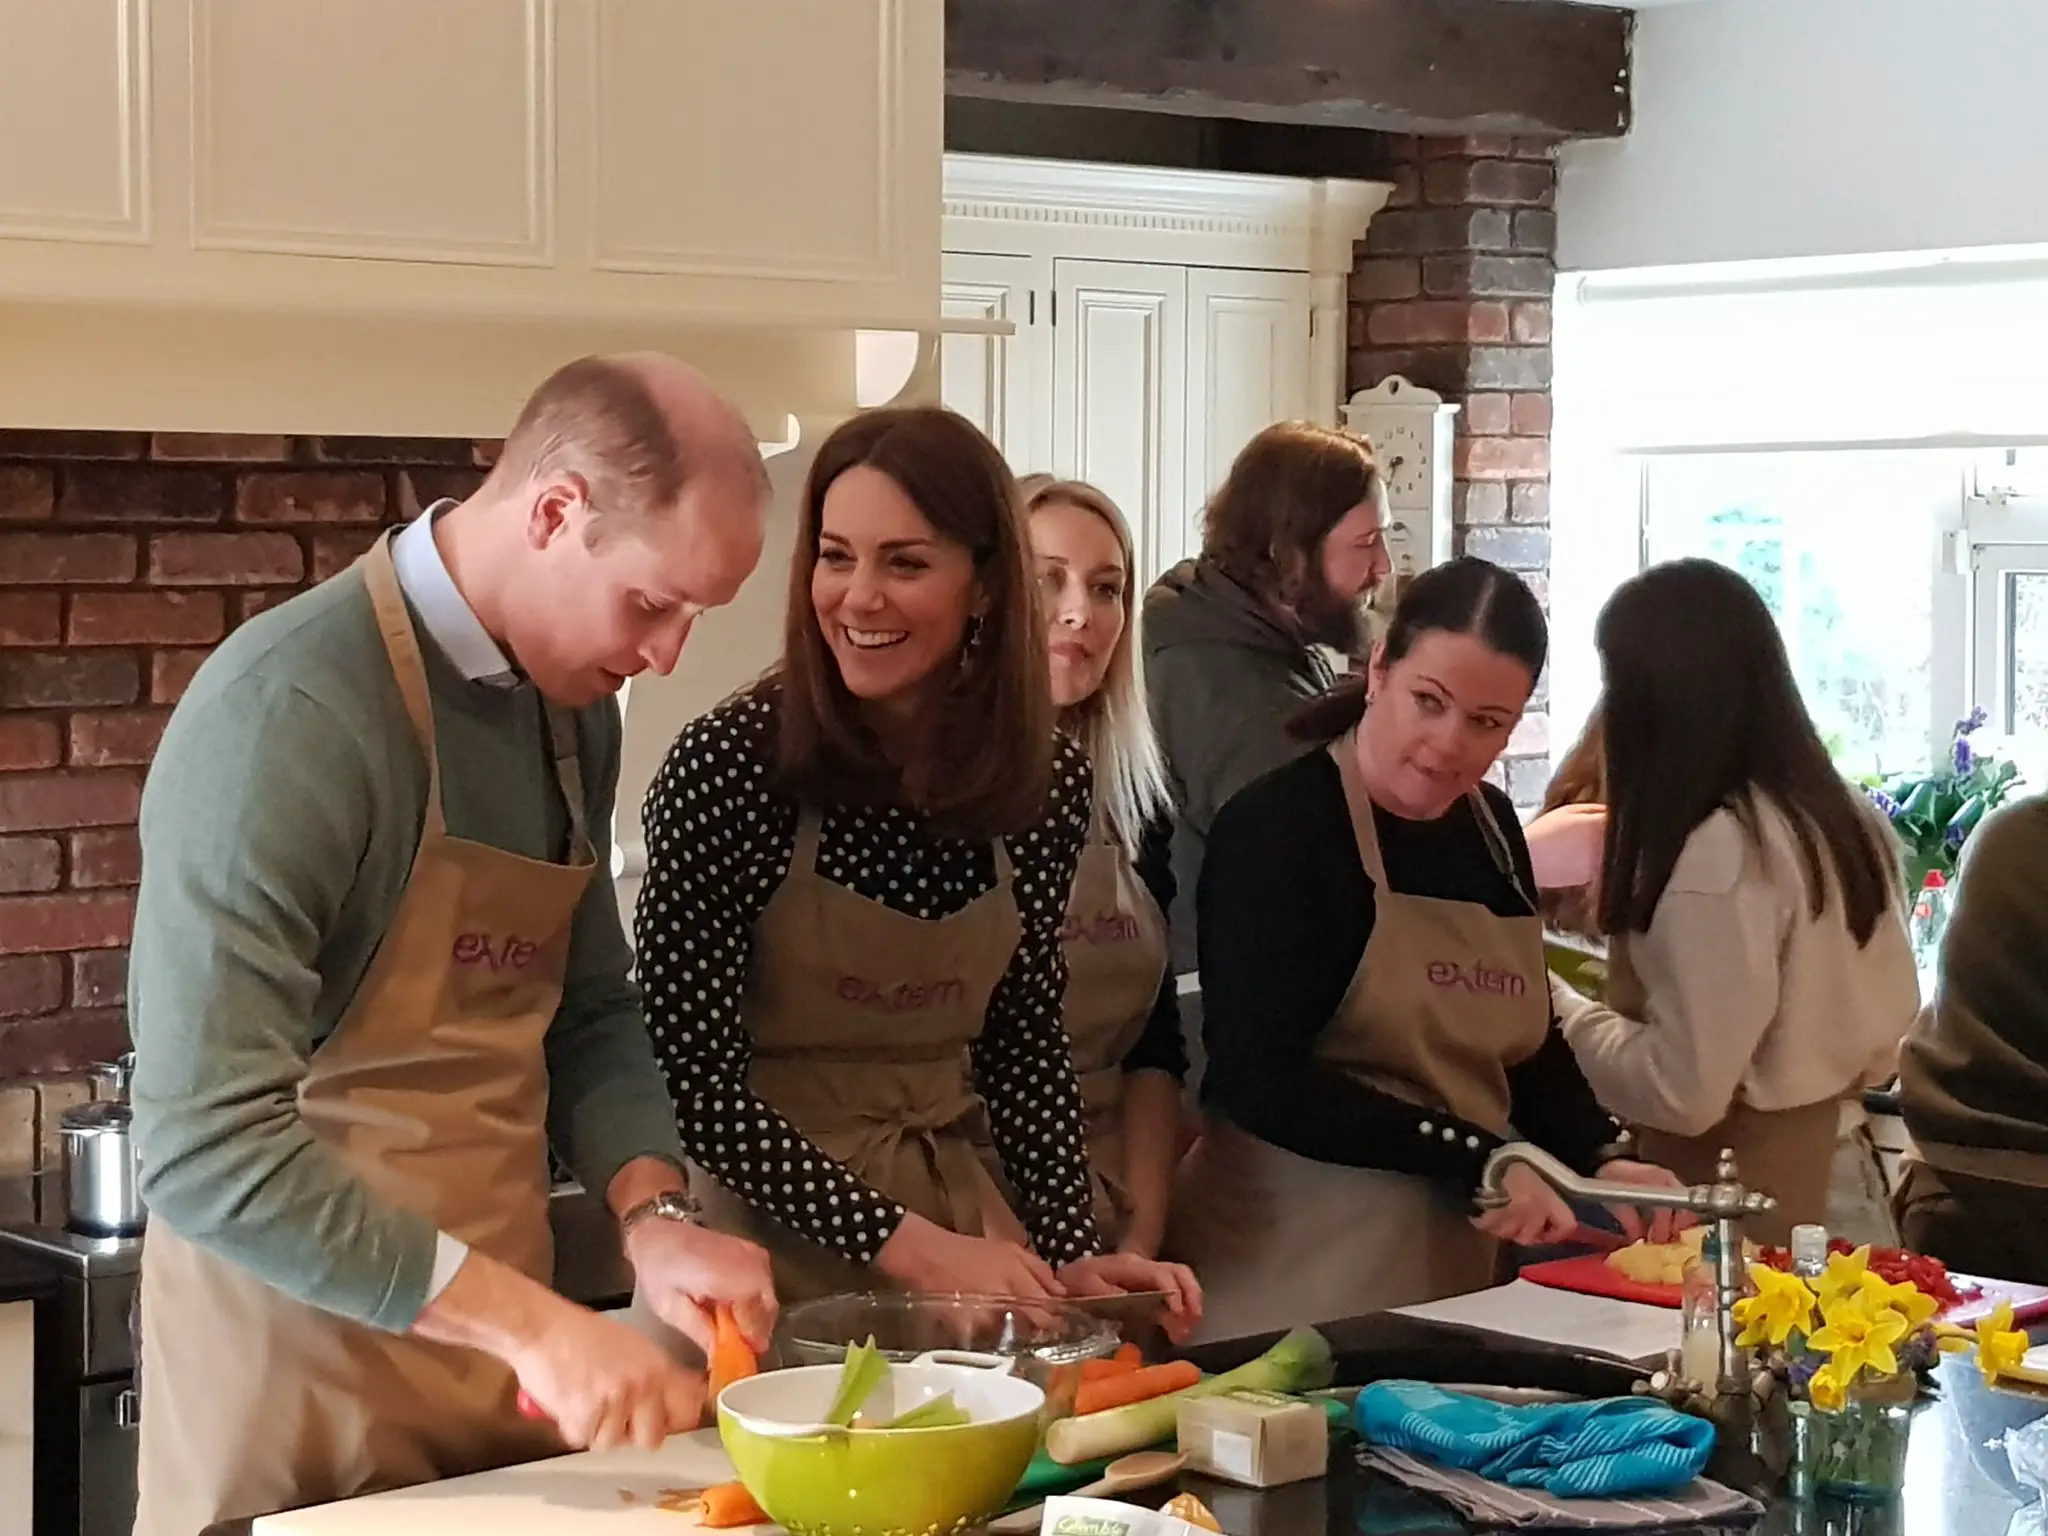 The Duchess of Cambridge helped in chopping carrots to make soup while Prince William tried his hand at mixing cookie dough for making cookies.